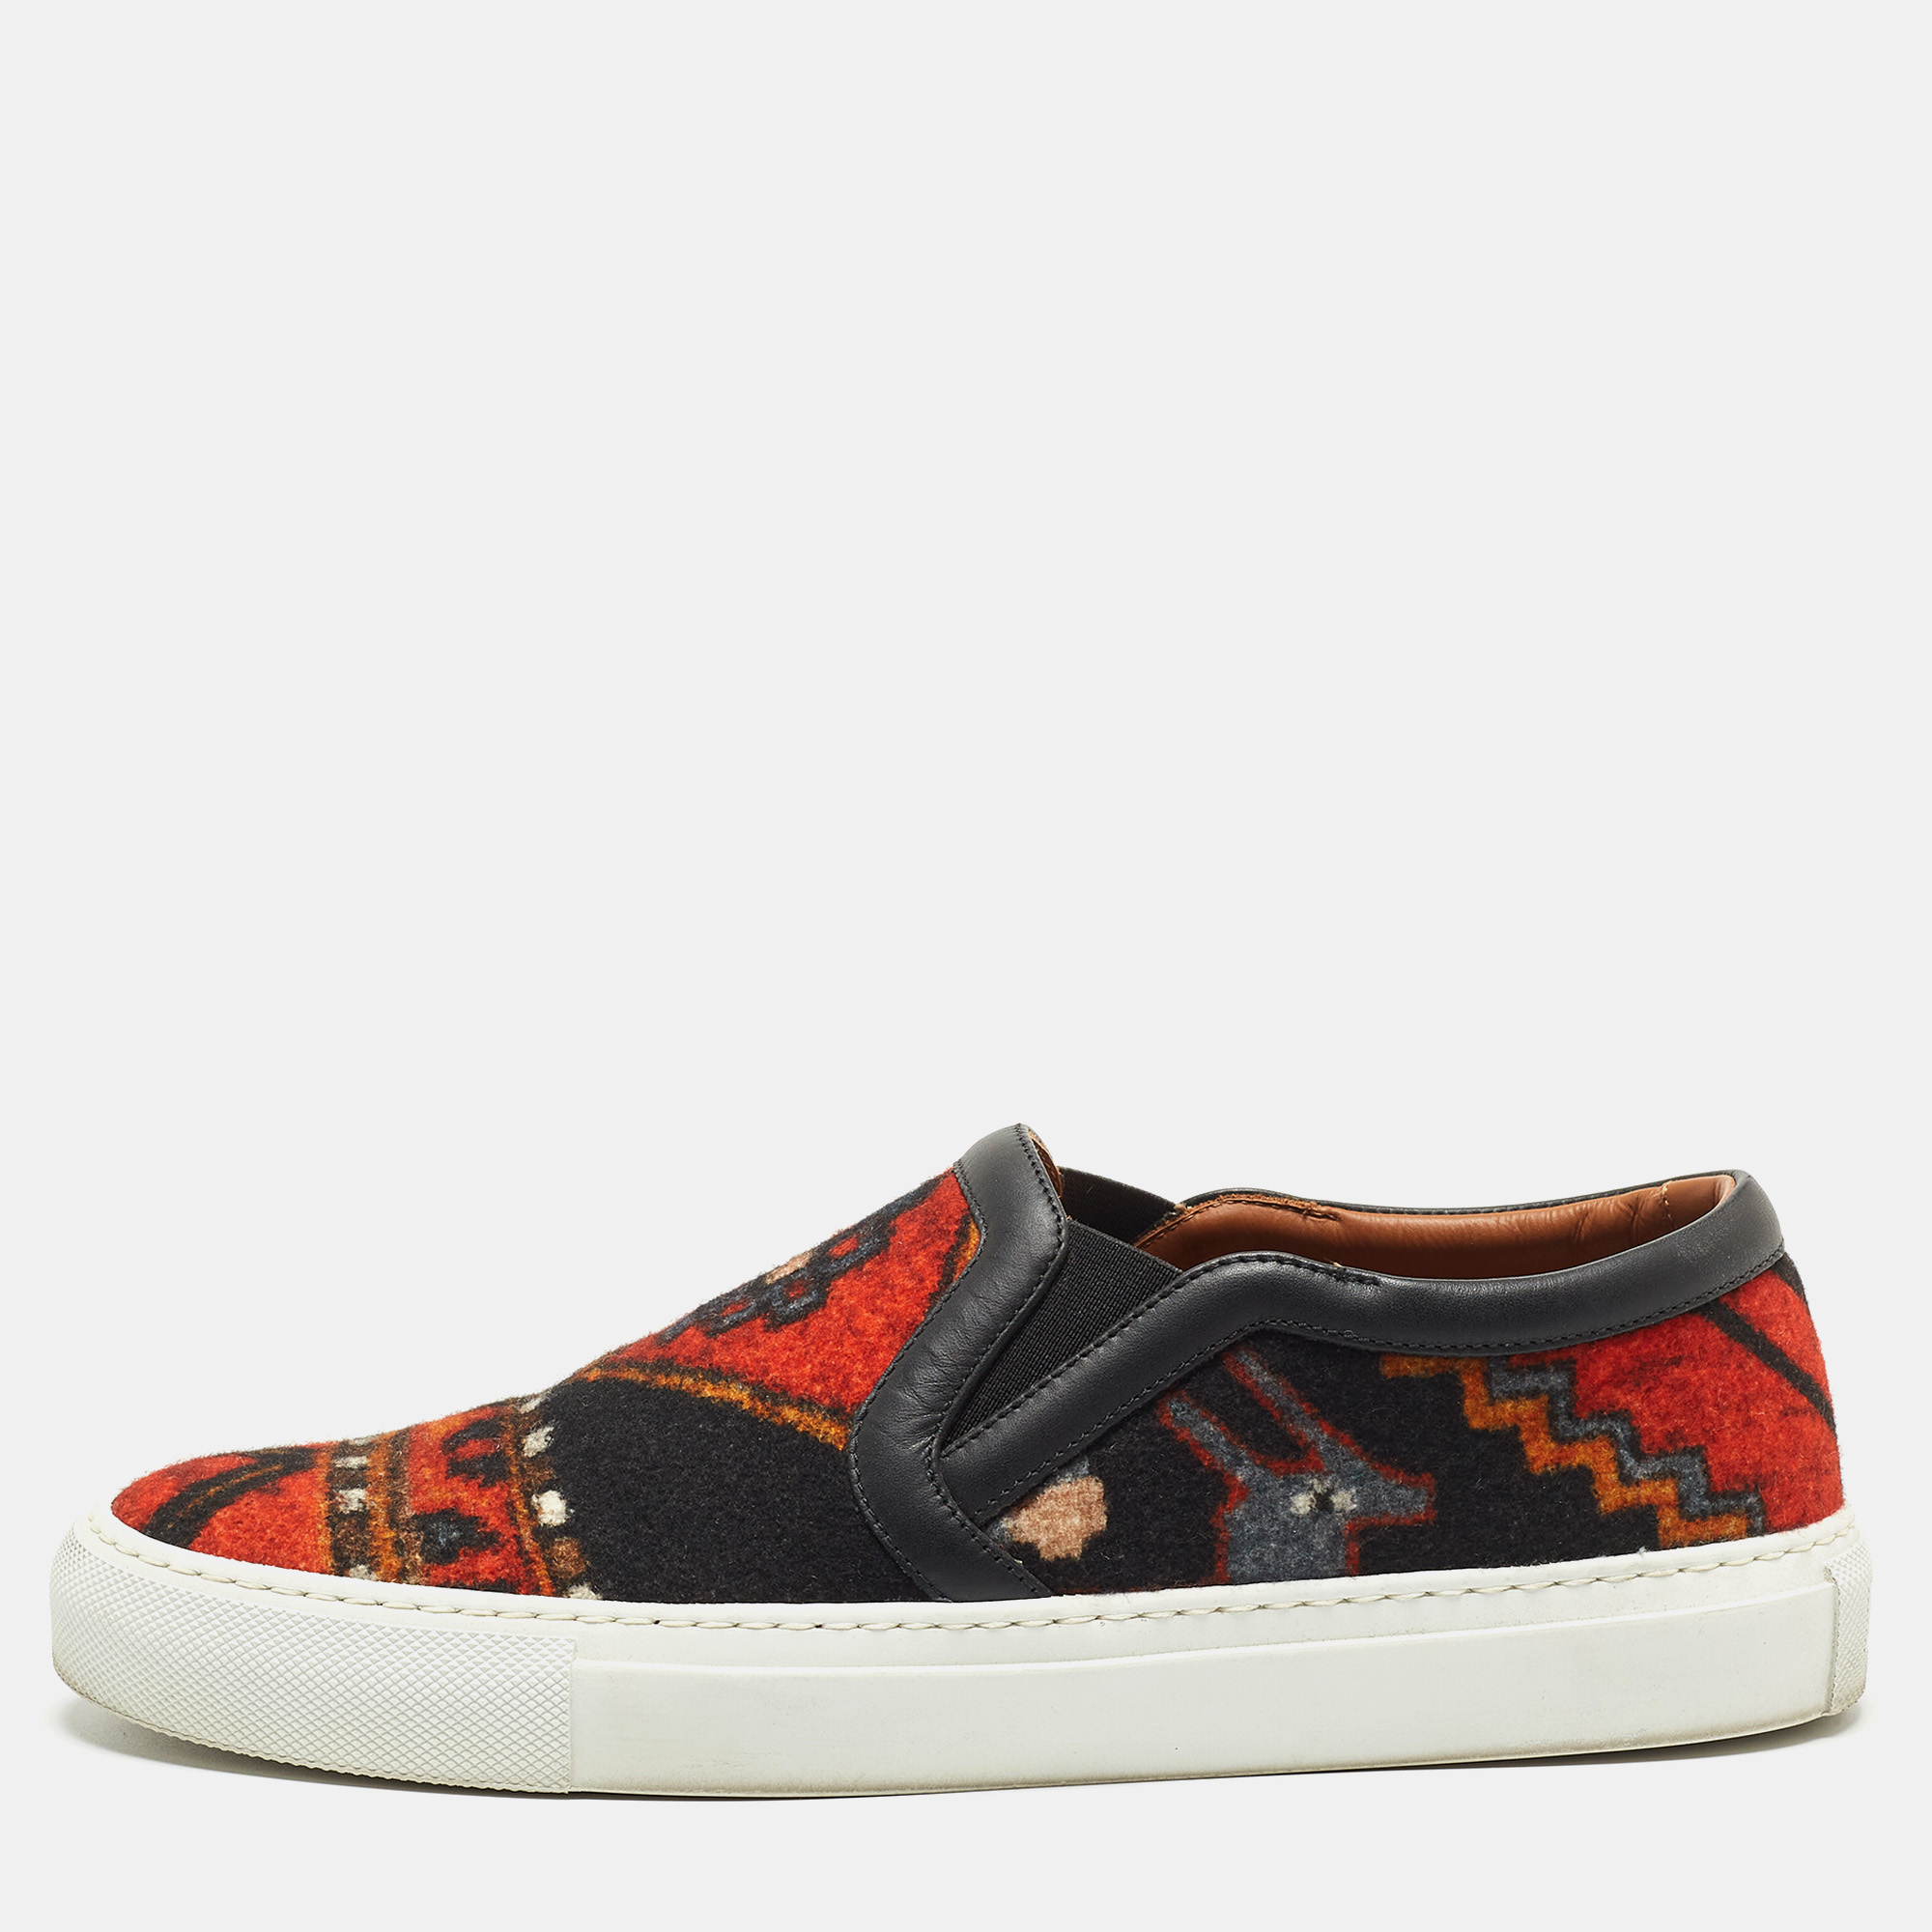 Givenchy Black/Orange Printed Felt And Leather Skate Sneakers Size 40